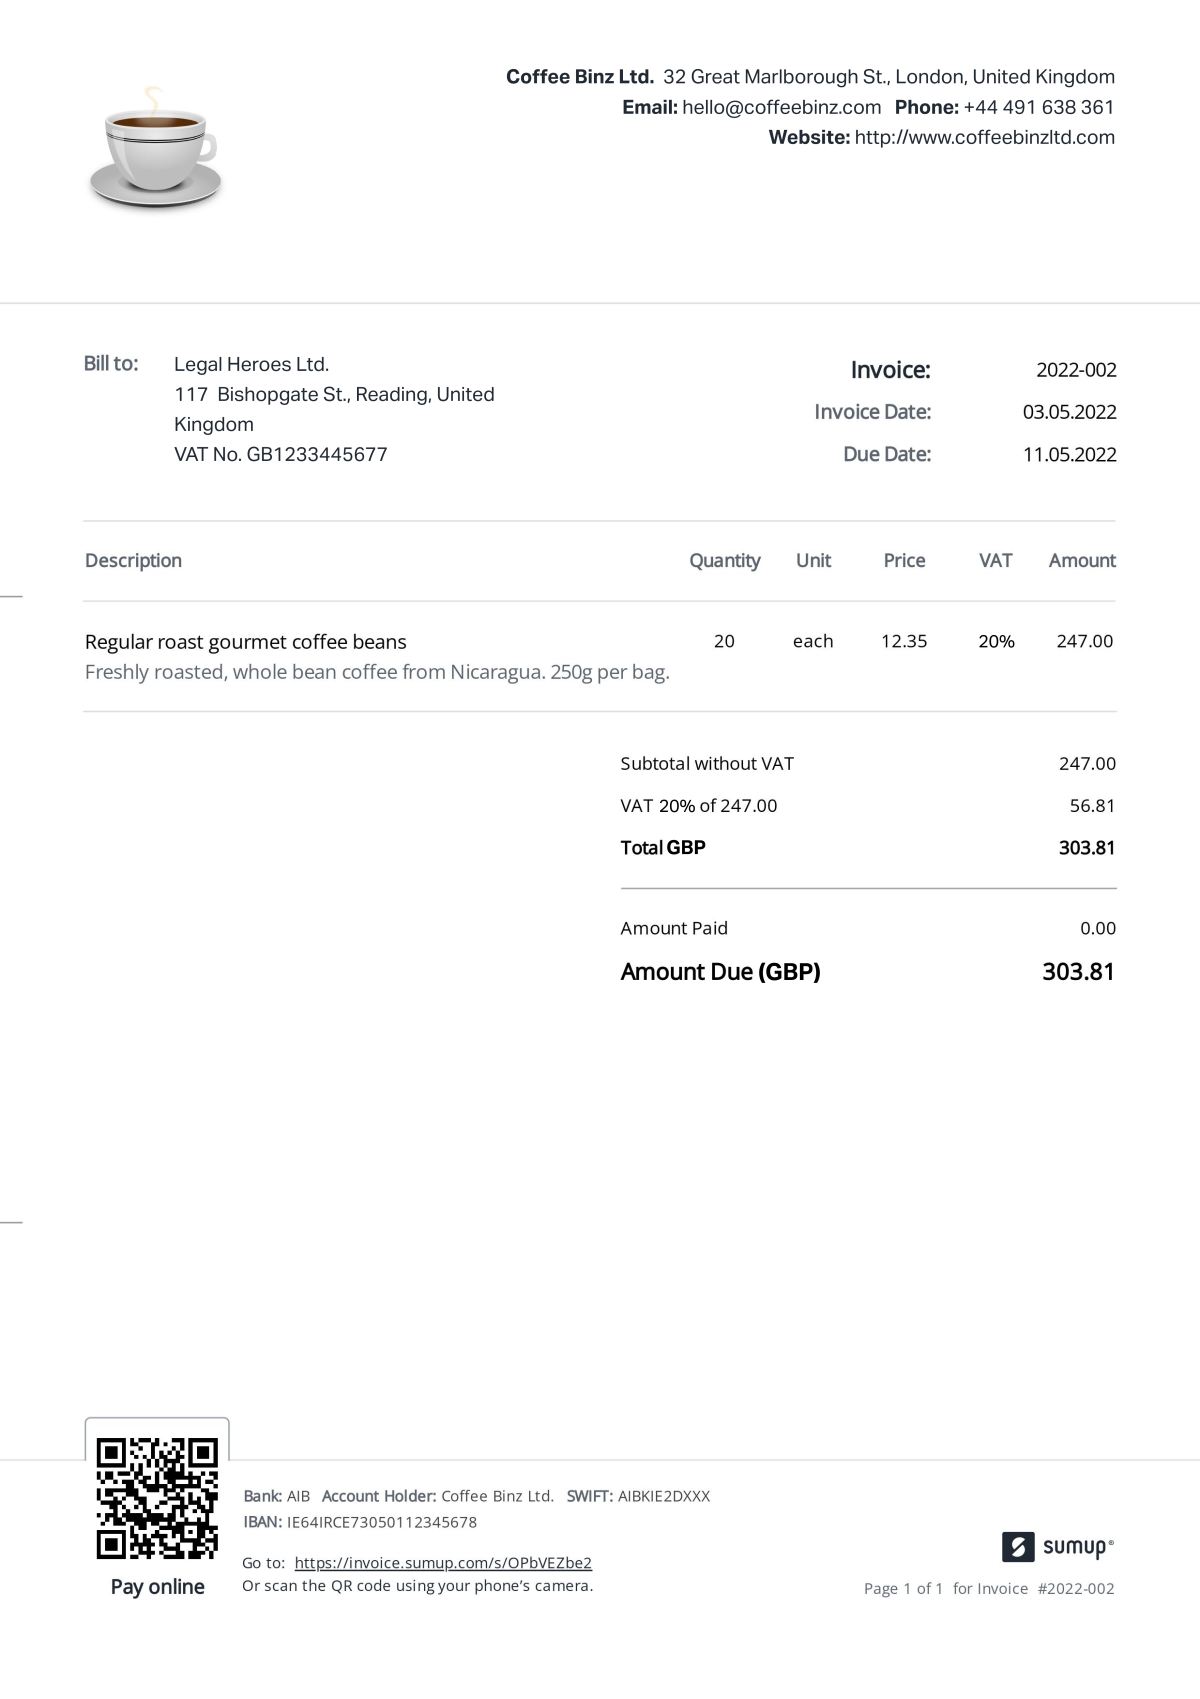 Sample invoice for a coffee shop